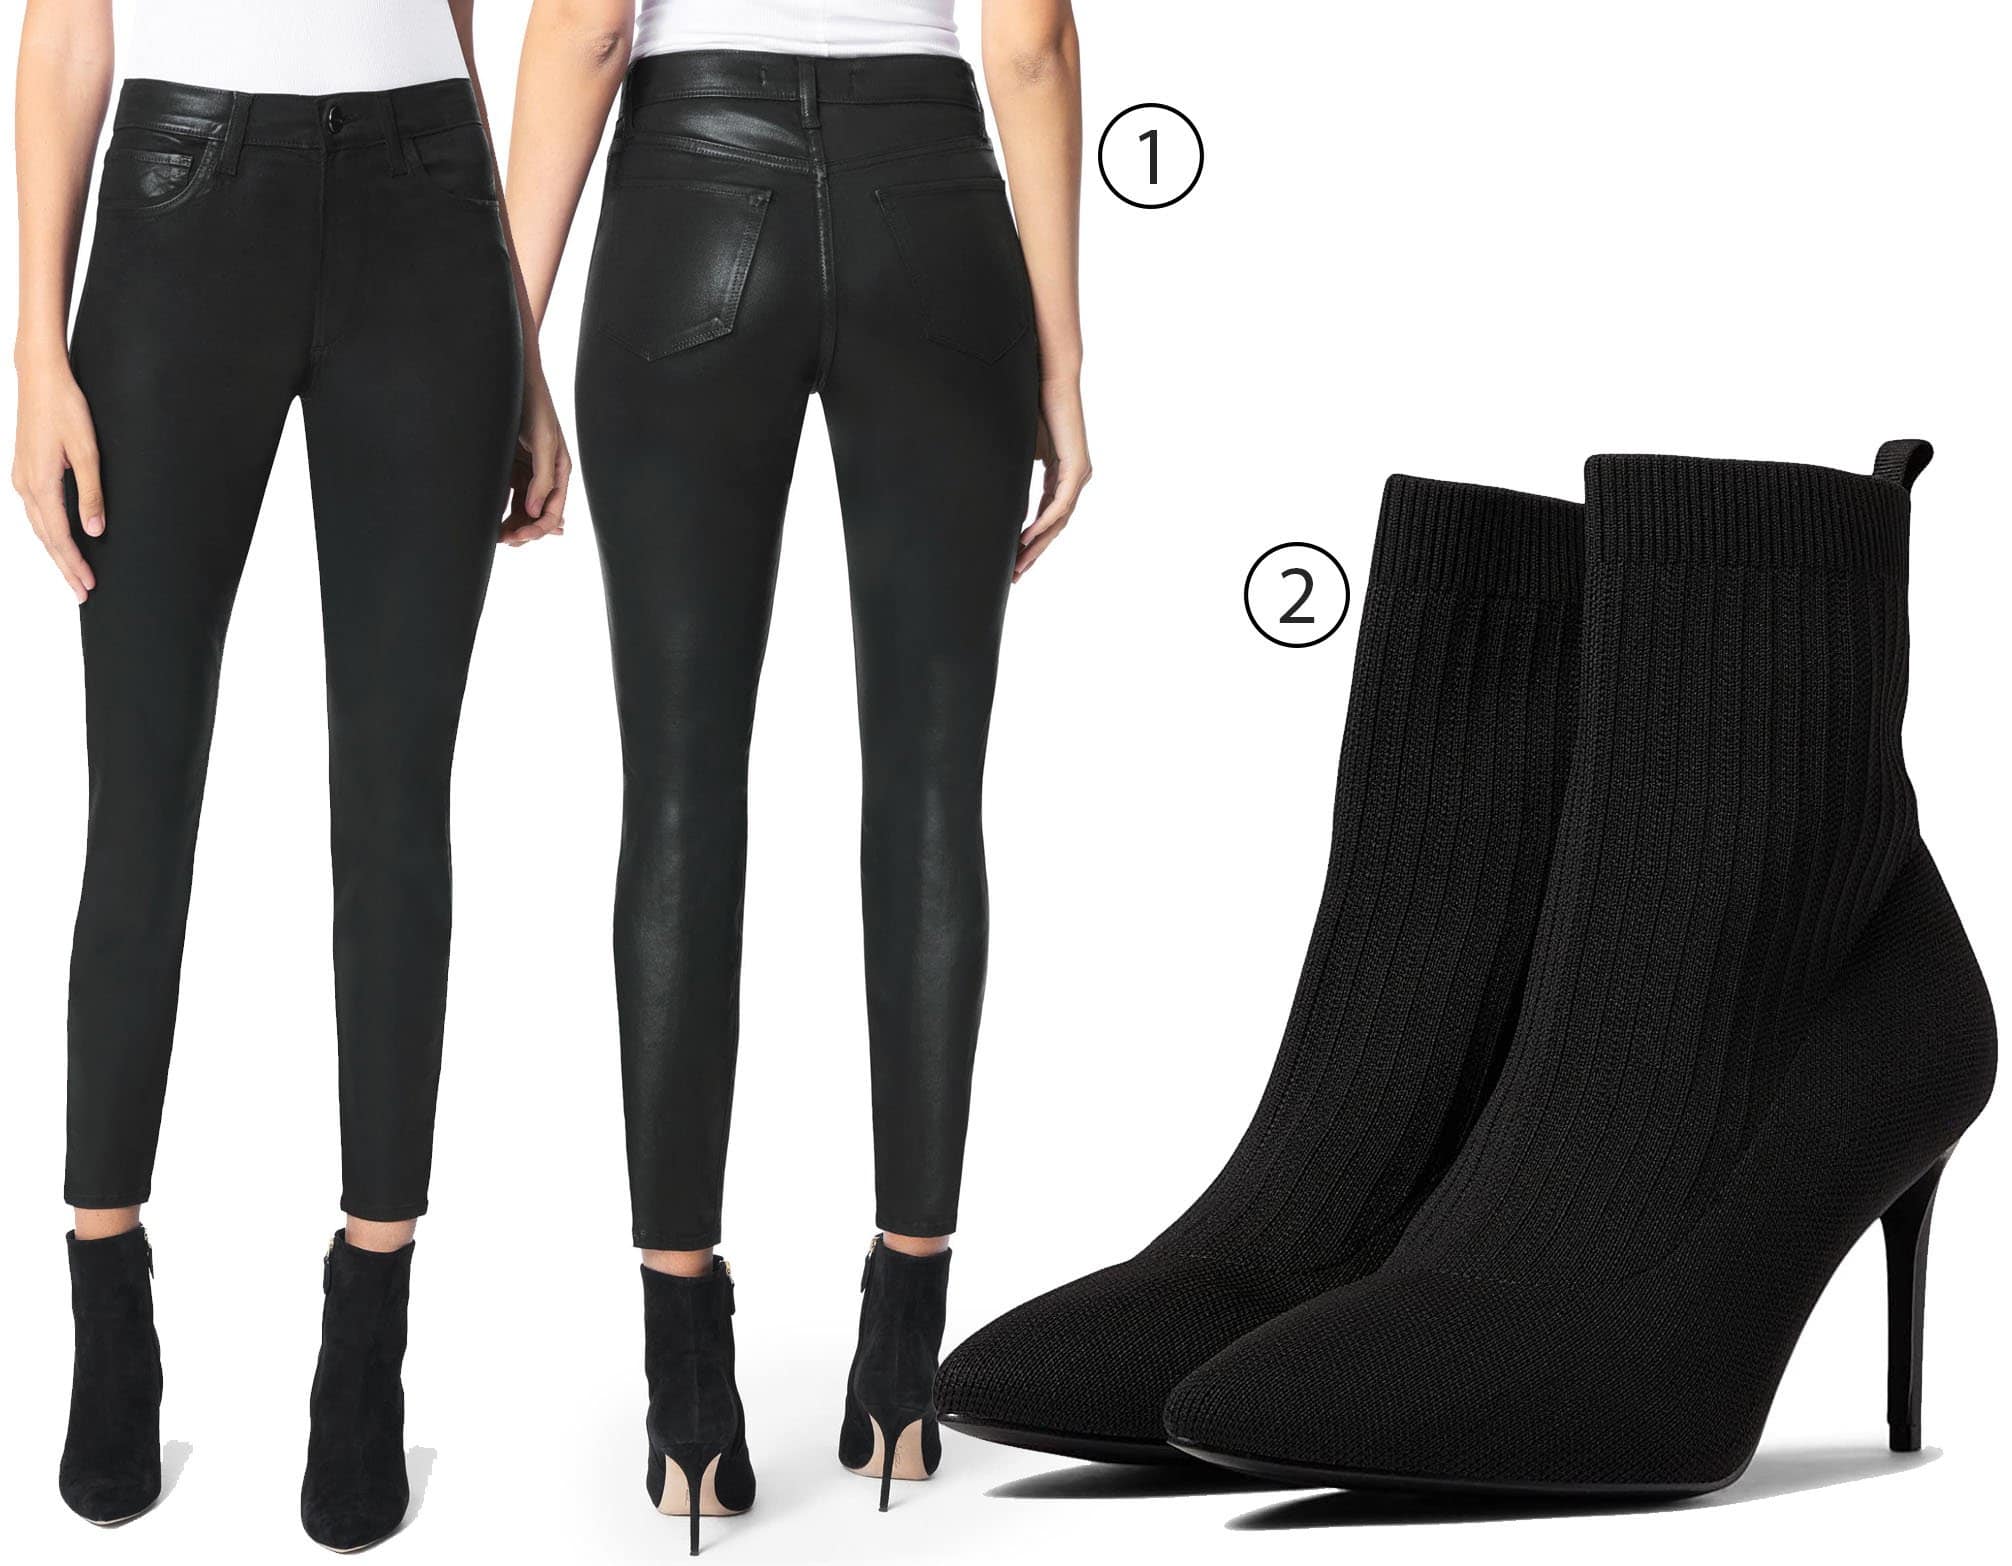 Joe's The Charlie Coated Ankle Skinny Jeans and Chinese Laundry Elba Booties